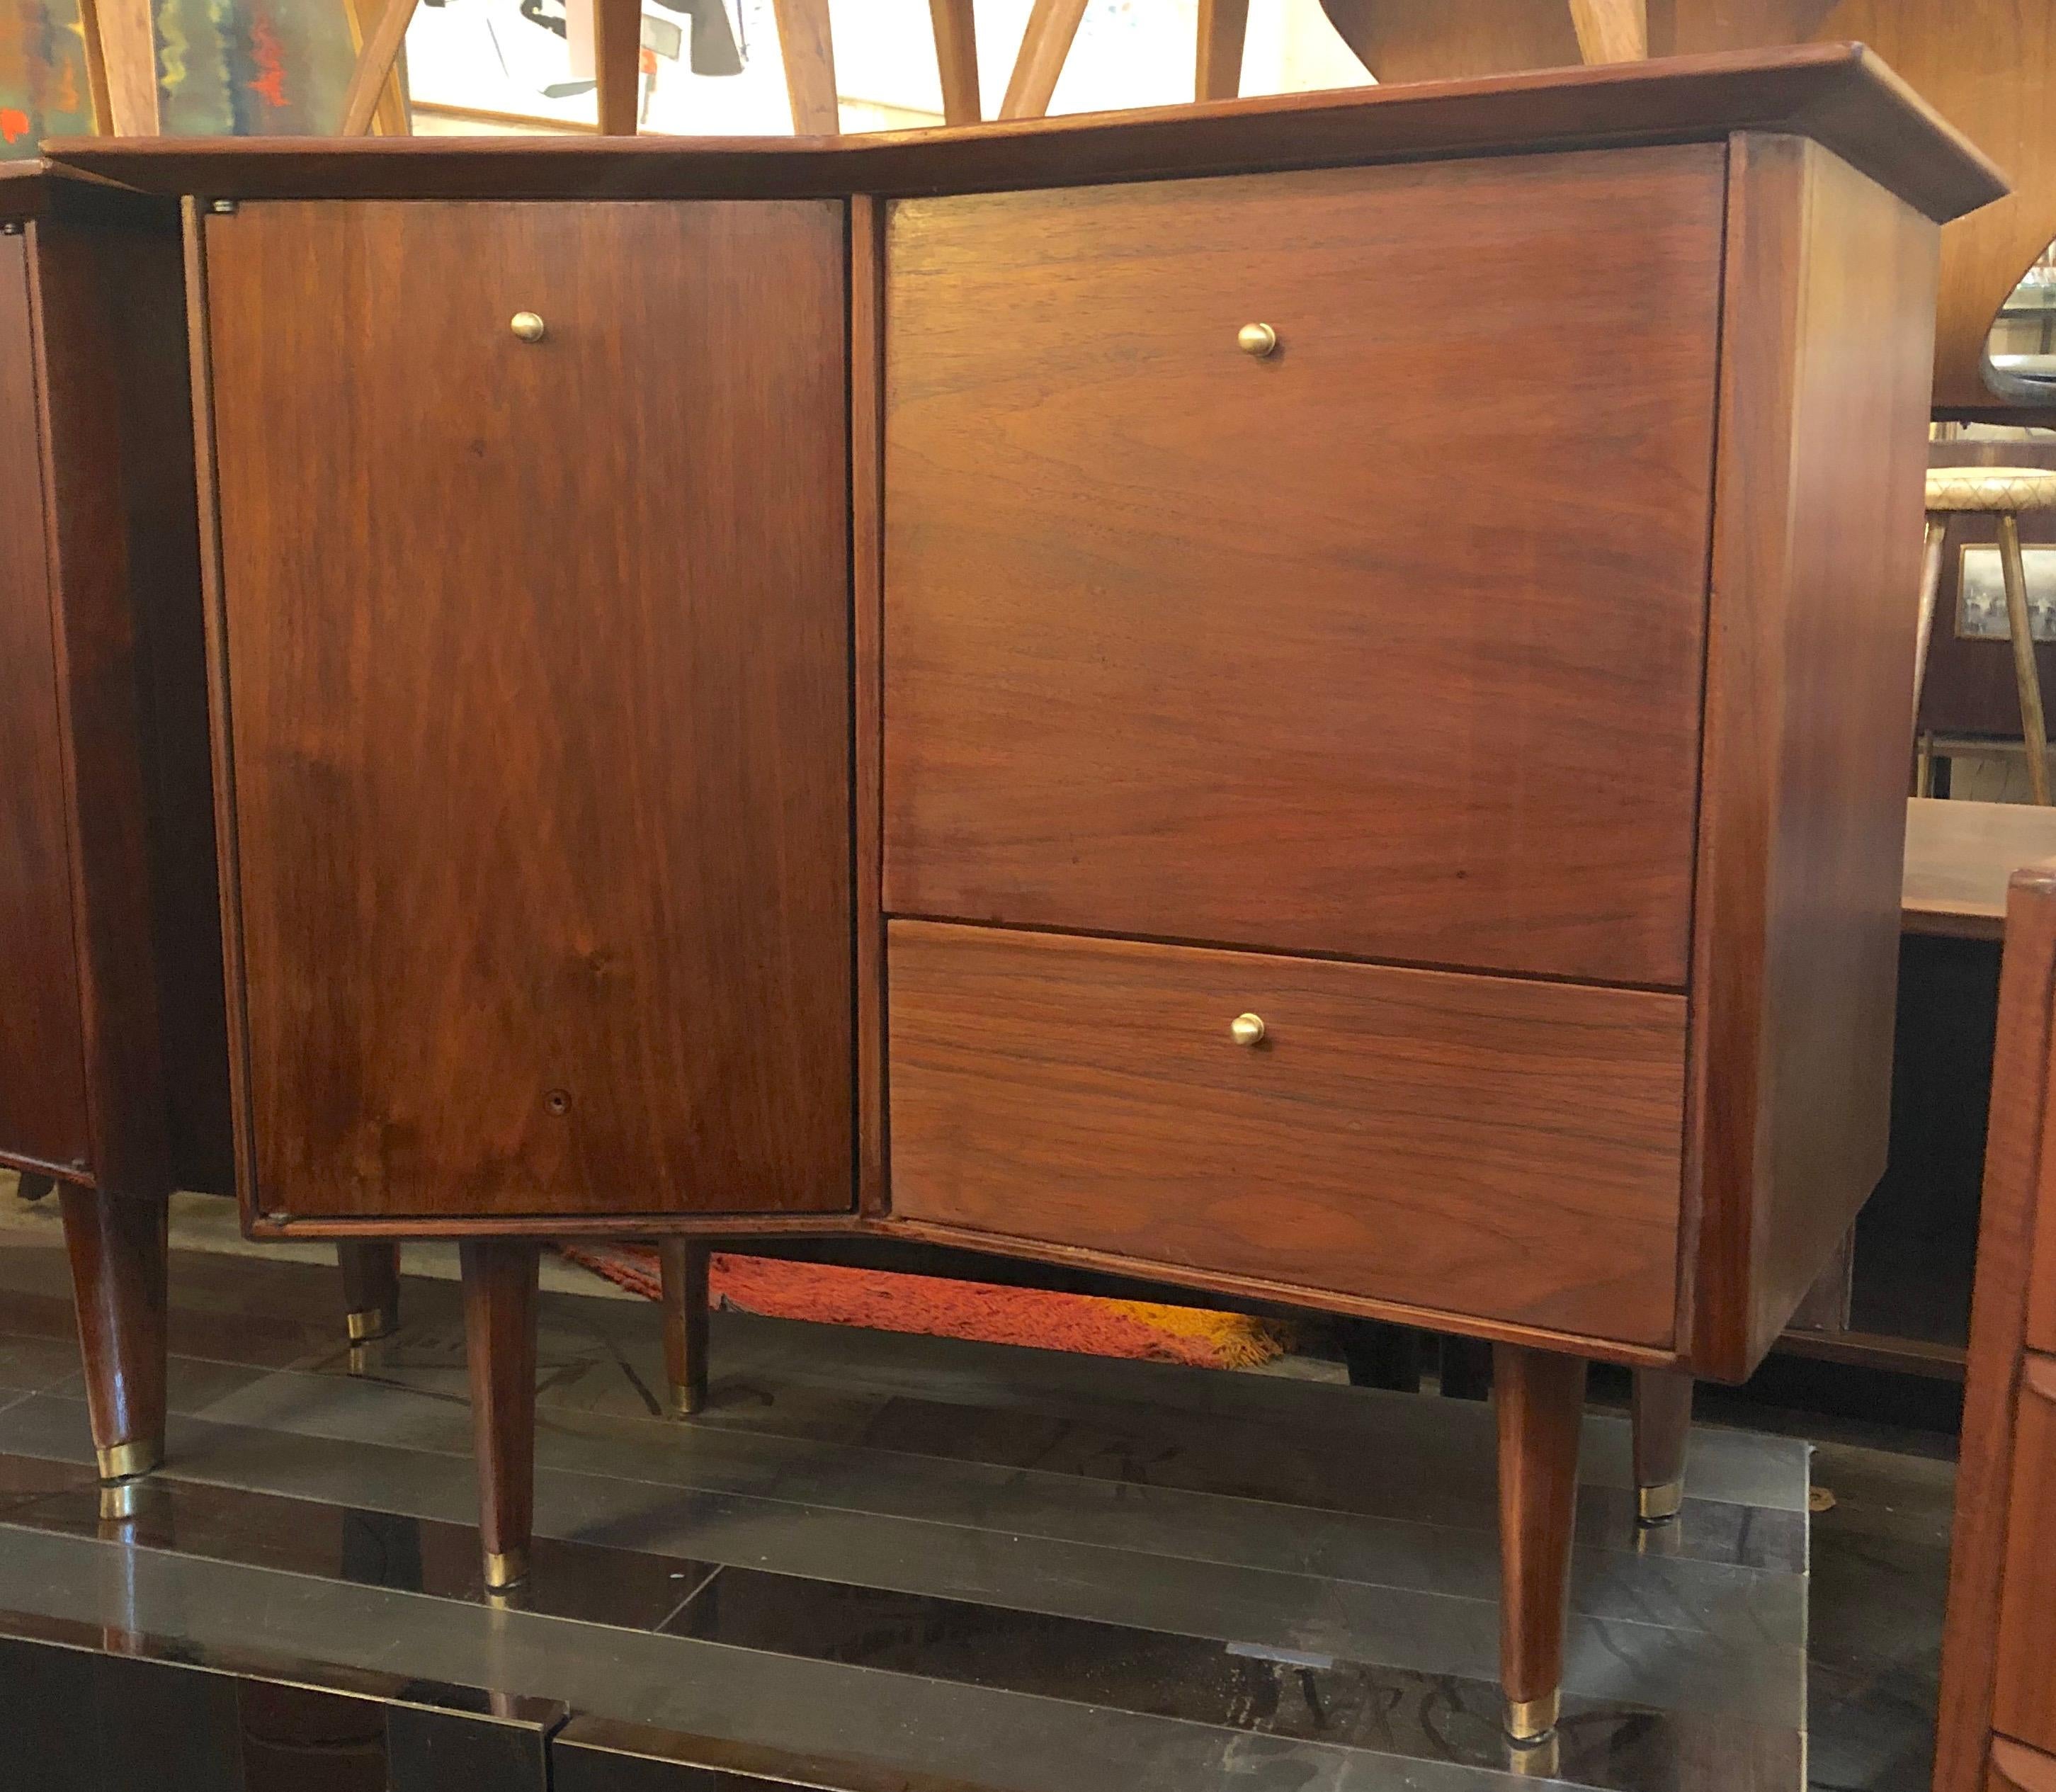 Stylish midcentury nightstands by Baker Furniture Co. Unusual design featuring angled tabletops, ample storage space, drop-down cabinets, brass accents on the feet and a sturdy walnut construction. 
Location: Brooklyn NY